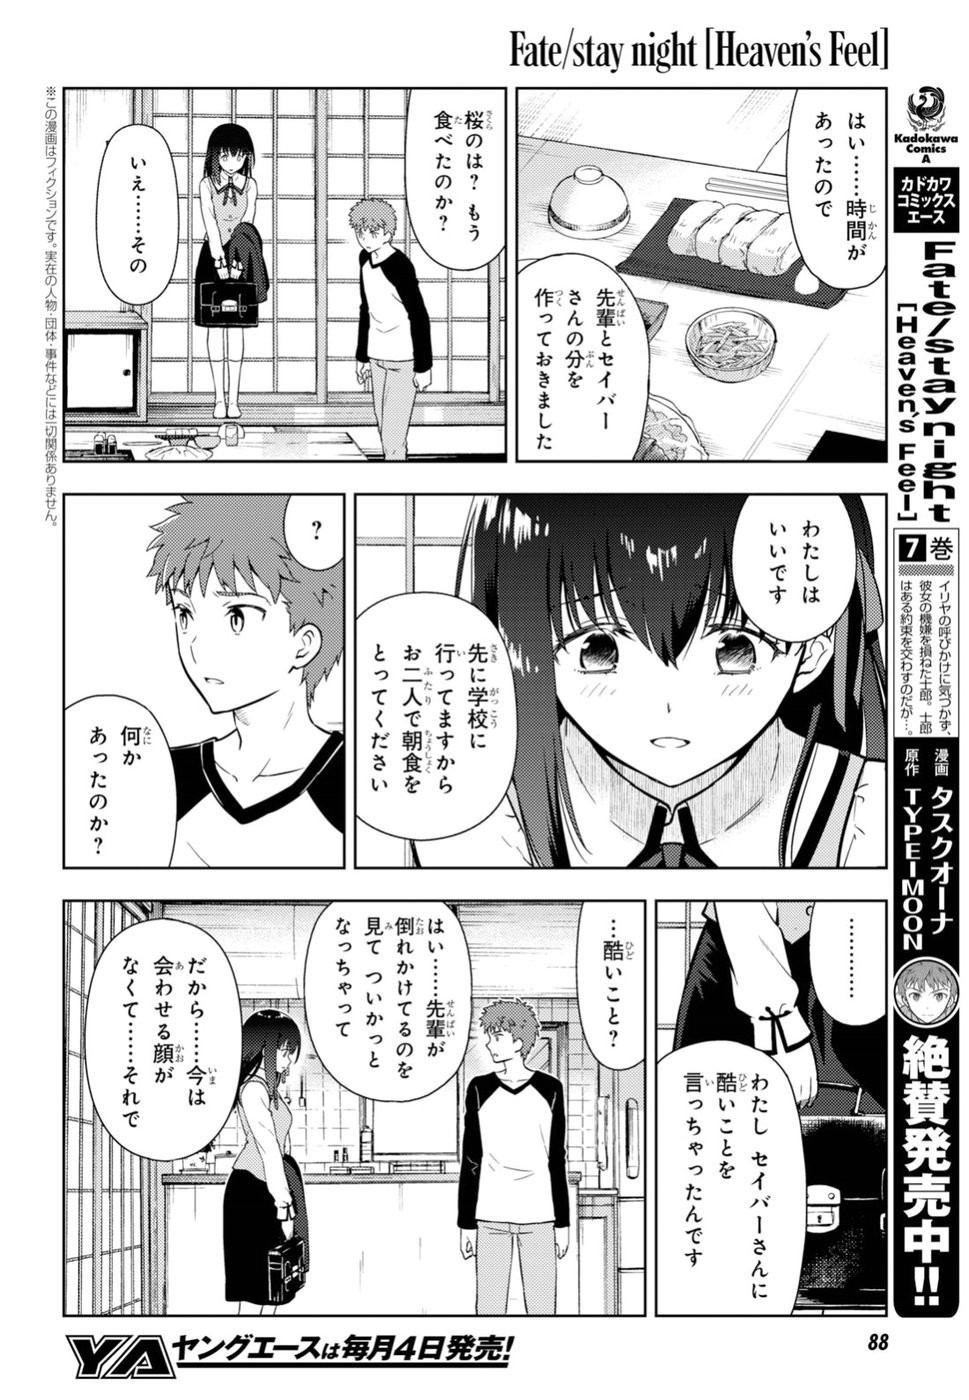 Fate/Stay night Heaven's Feel - Chapter 48 - Page 2